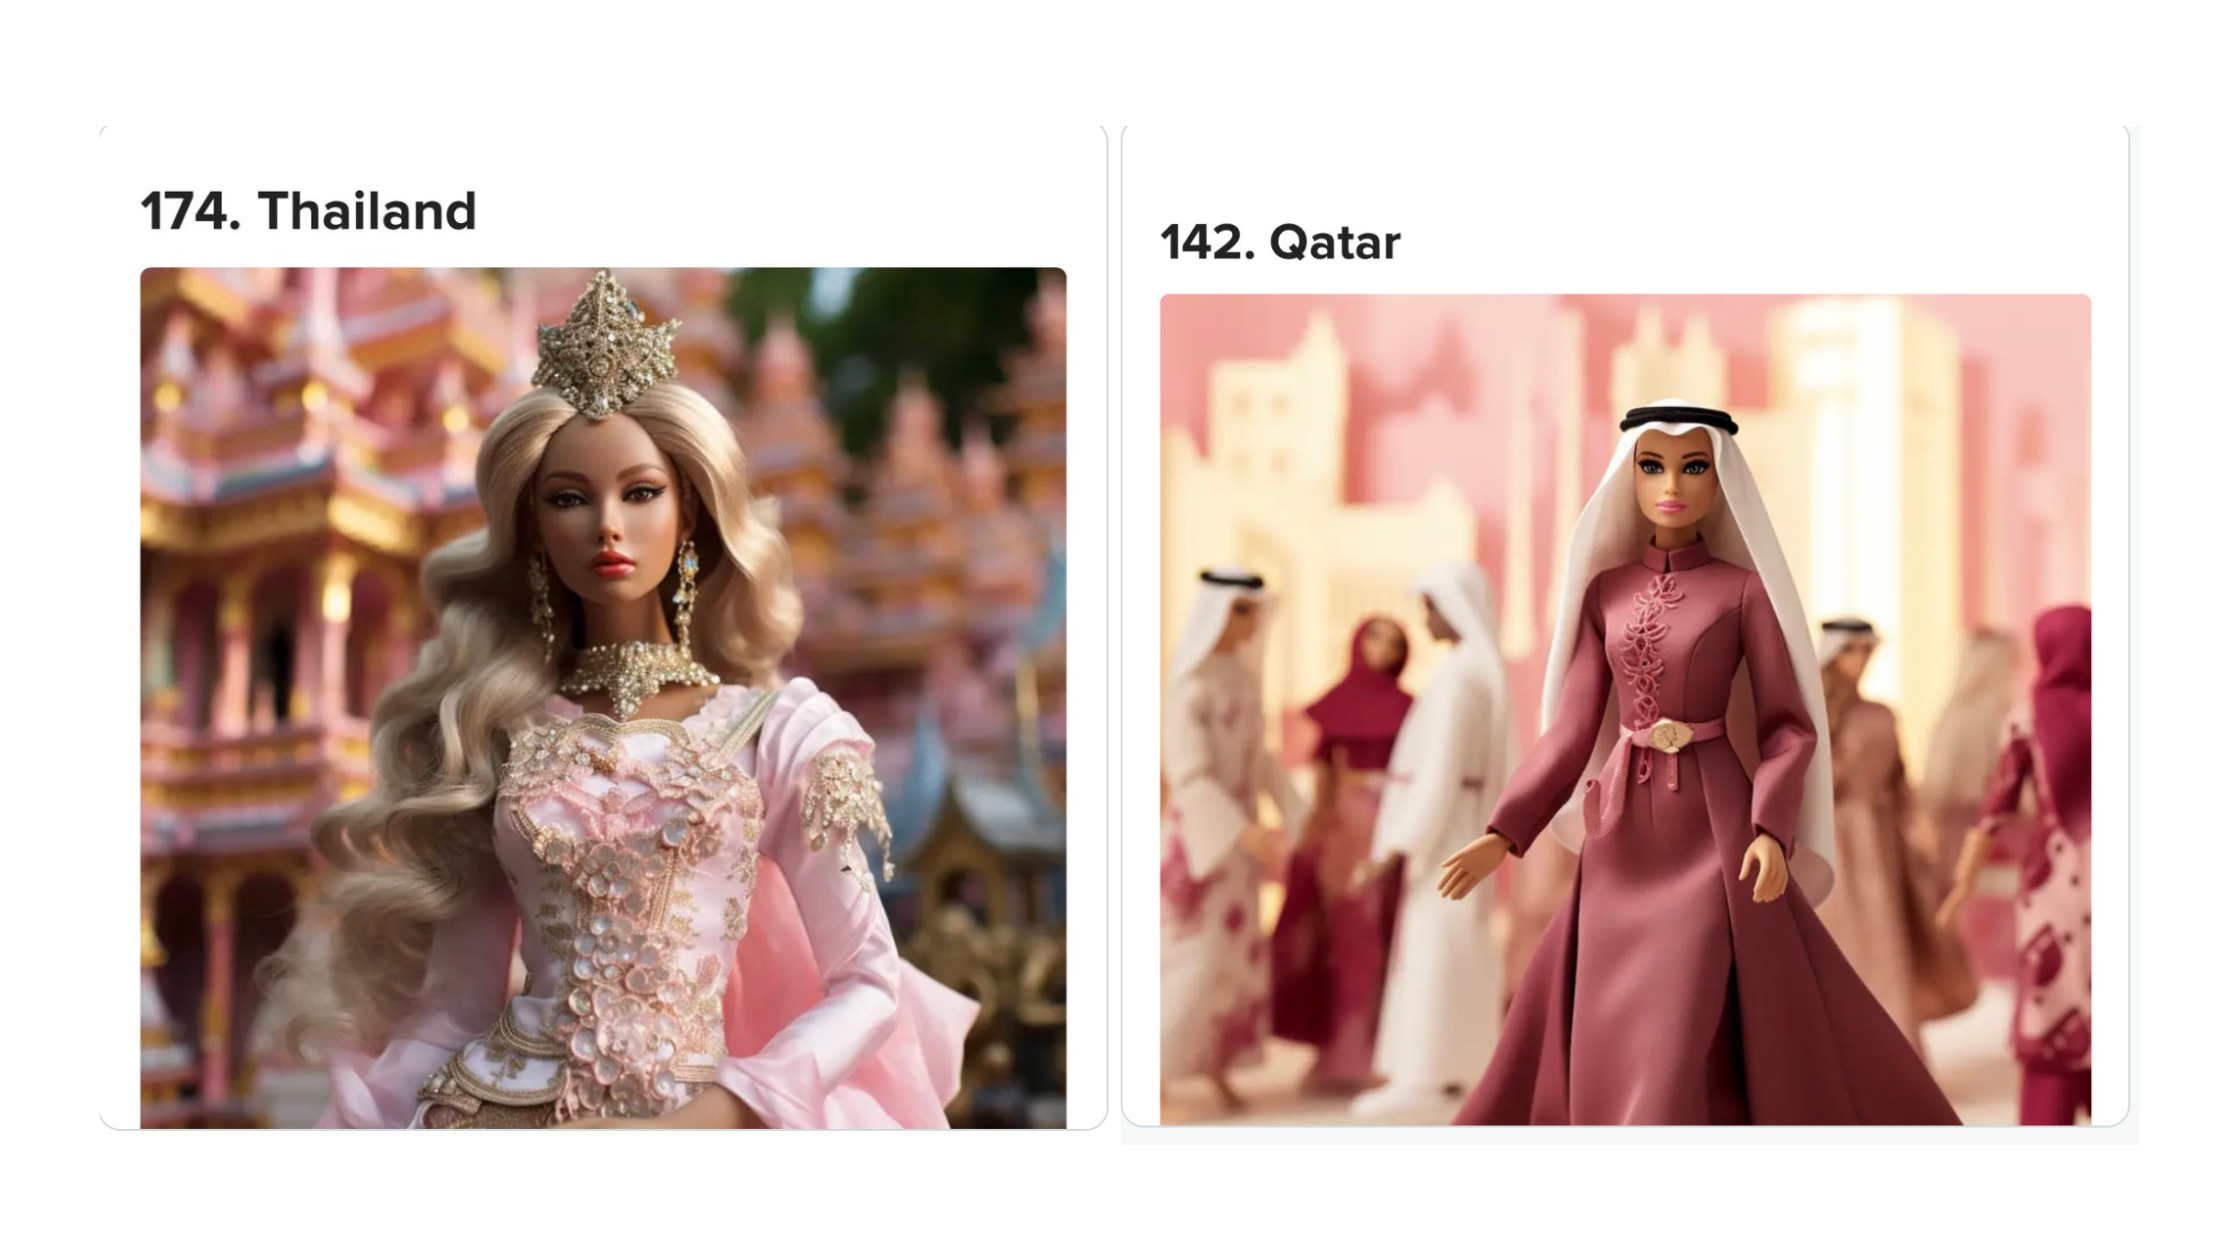 Culturally insensitive Barbie AI images